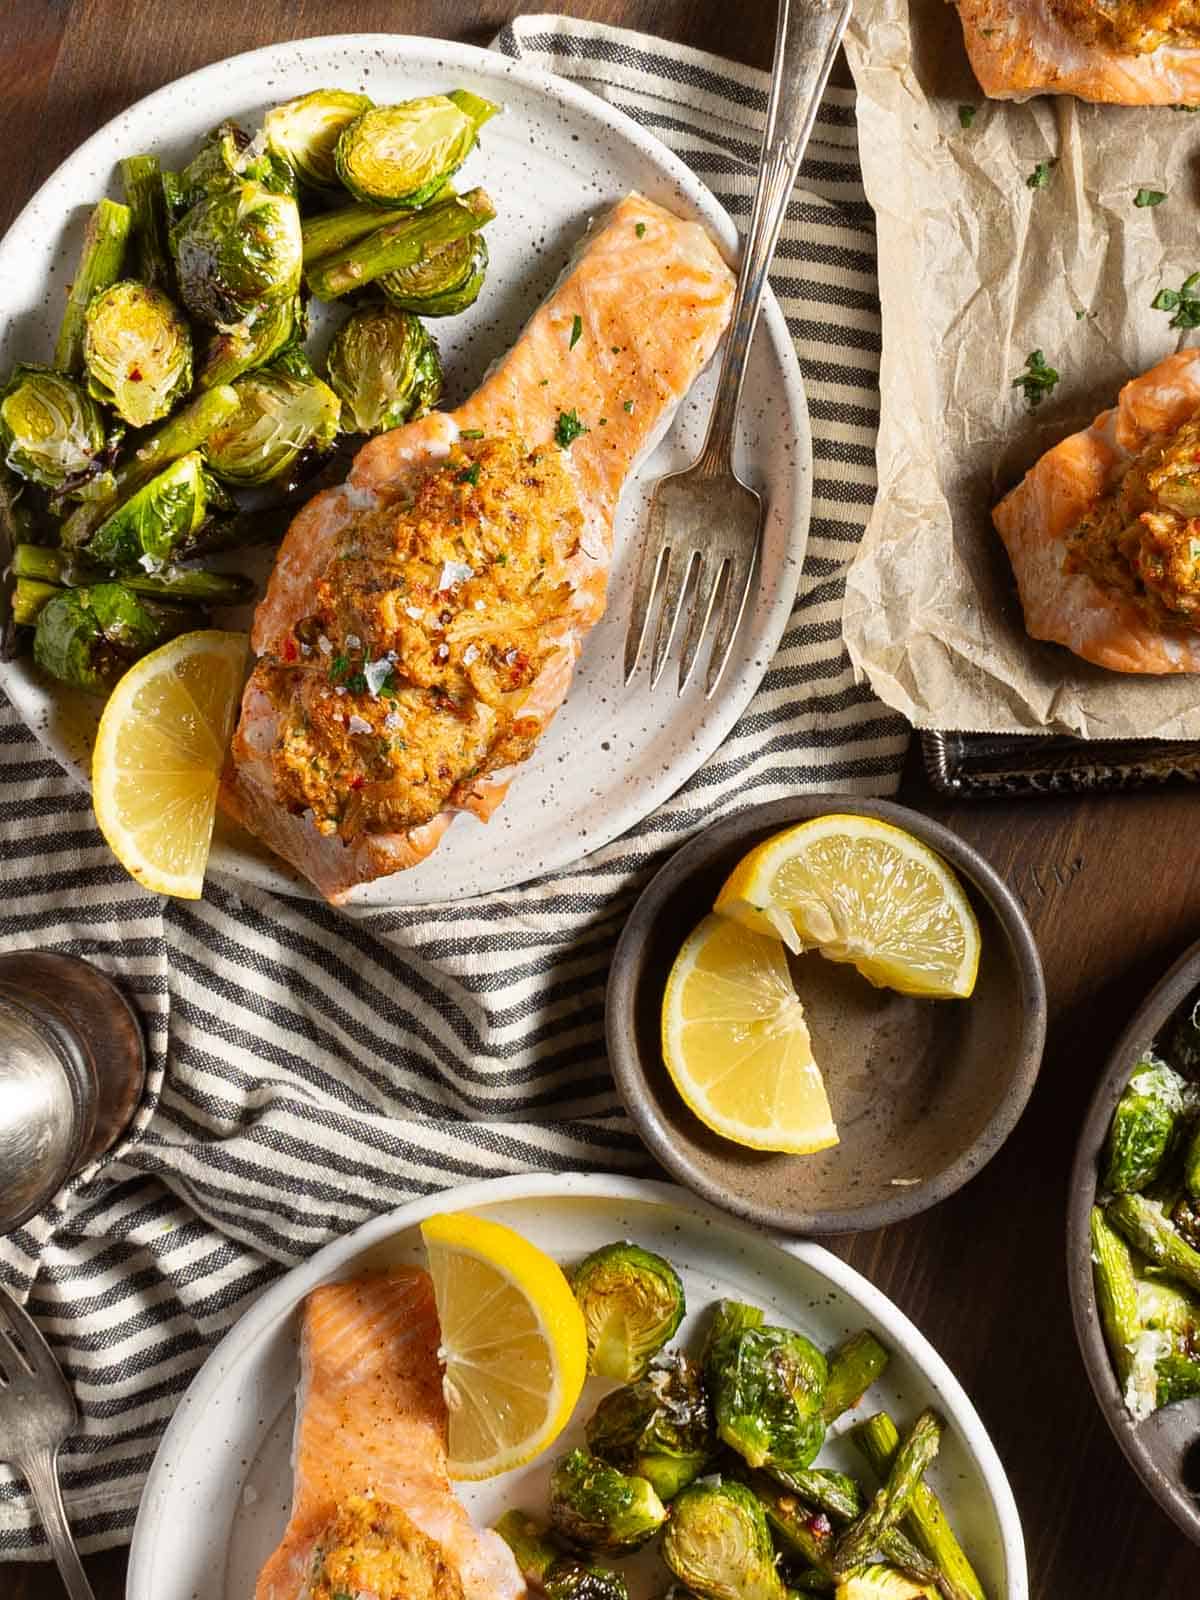 Cajun crab stuffed salmon on a plate with brussels sprouts and asparagus.